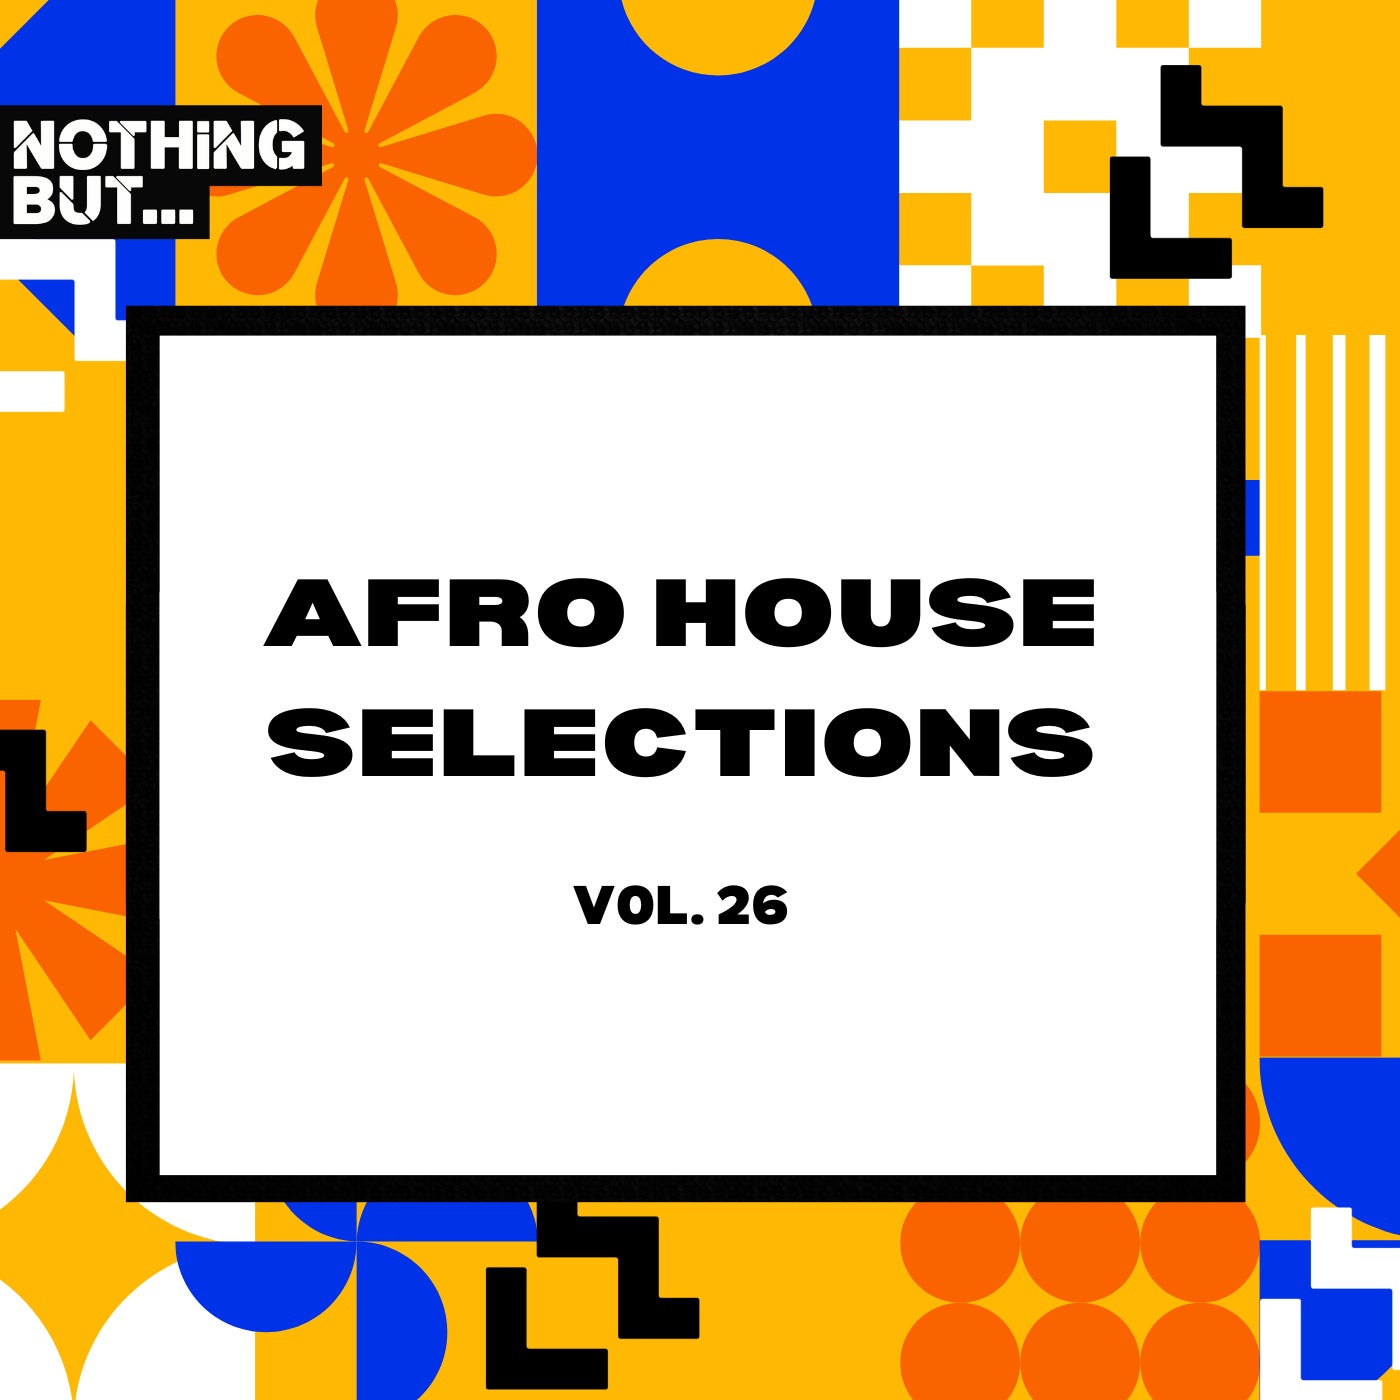 Nothing But... Afro House Selections, Vol. 26